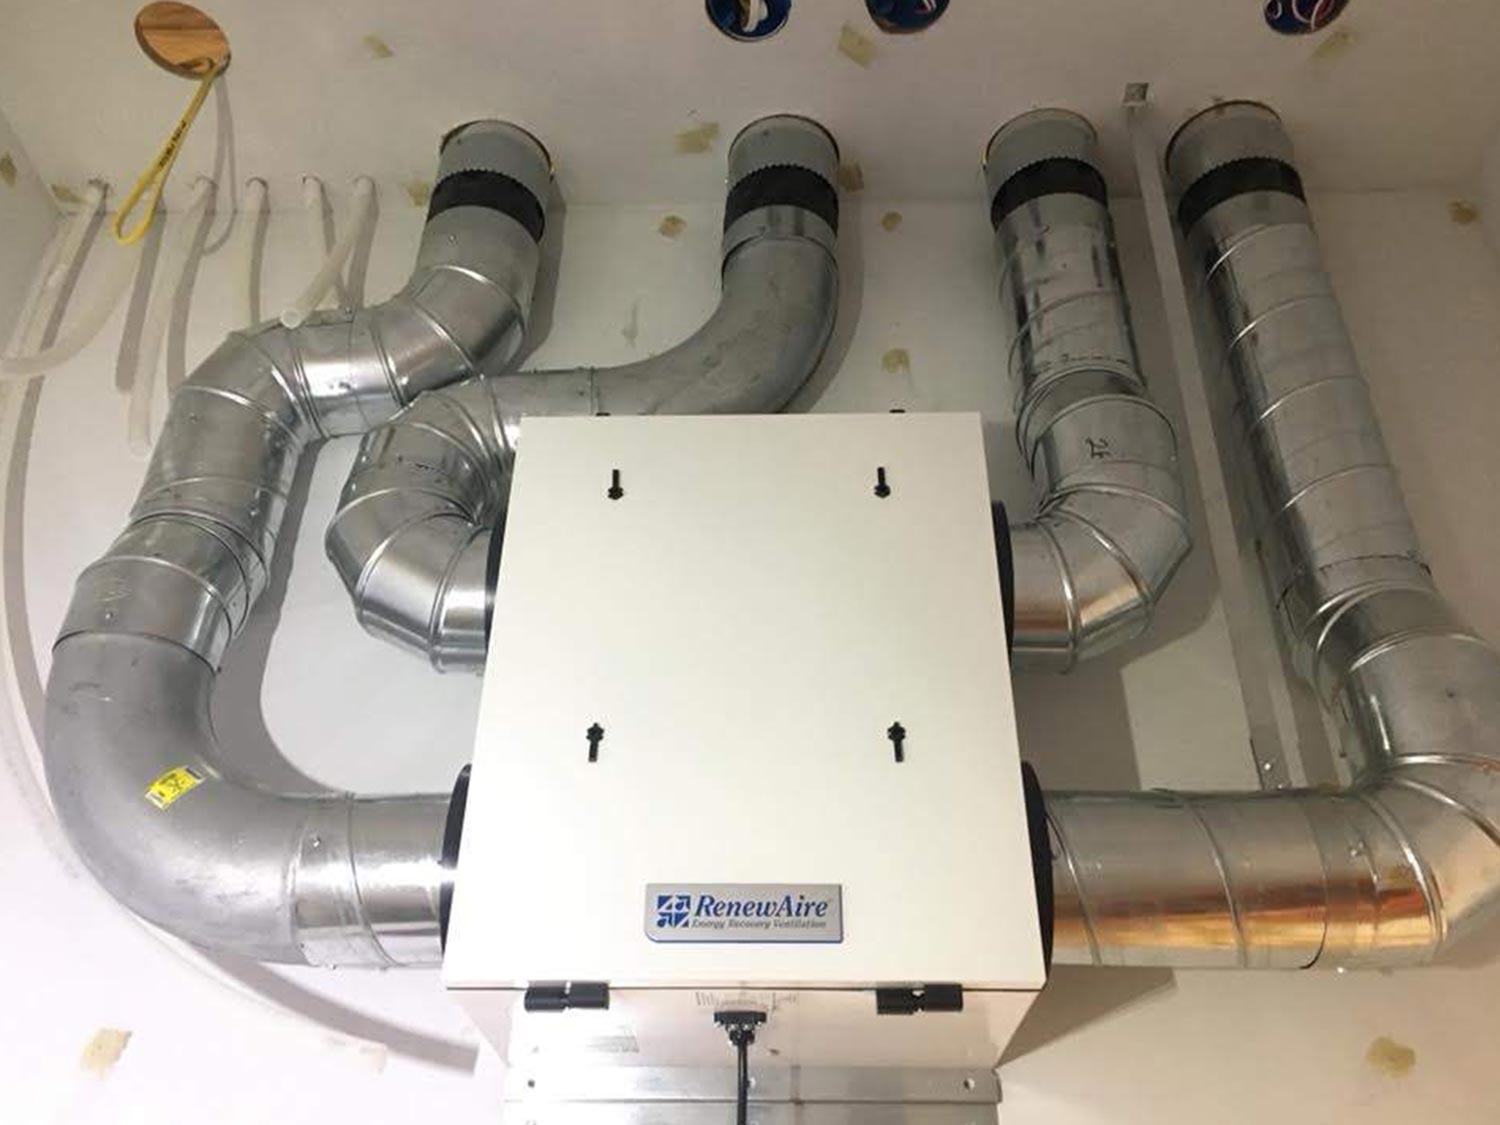 RenewAire Energy Recovery Ventilation